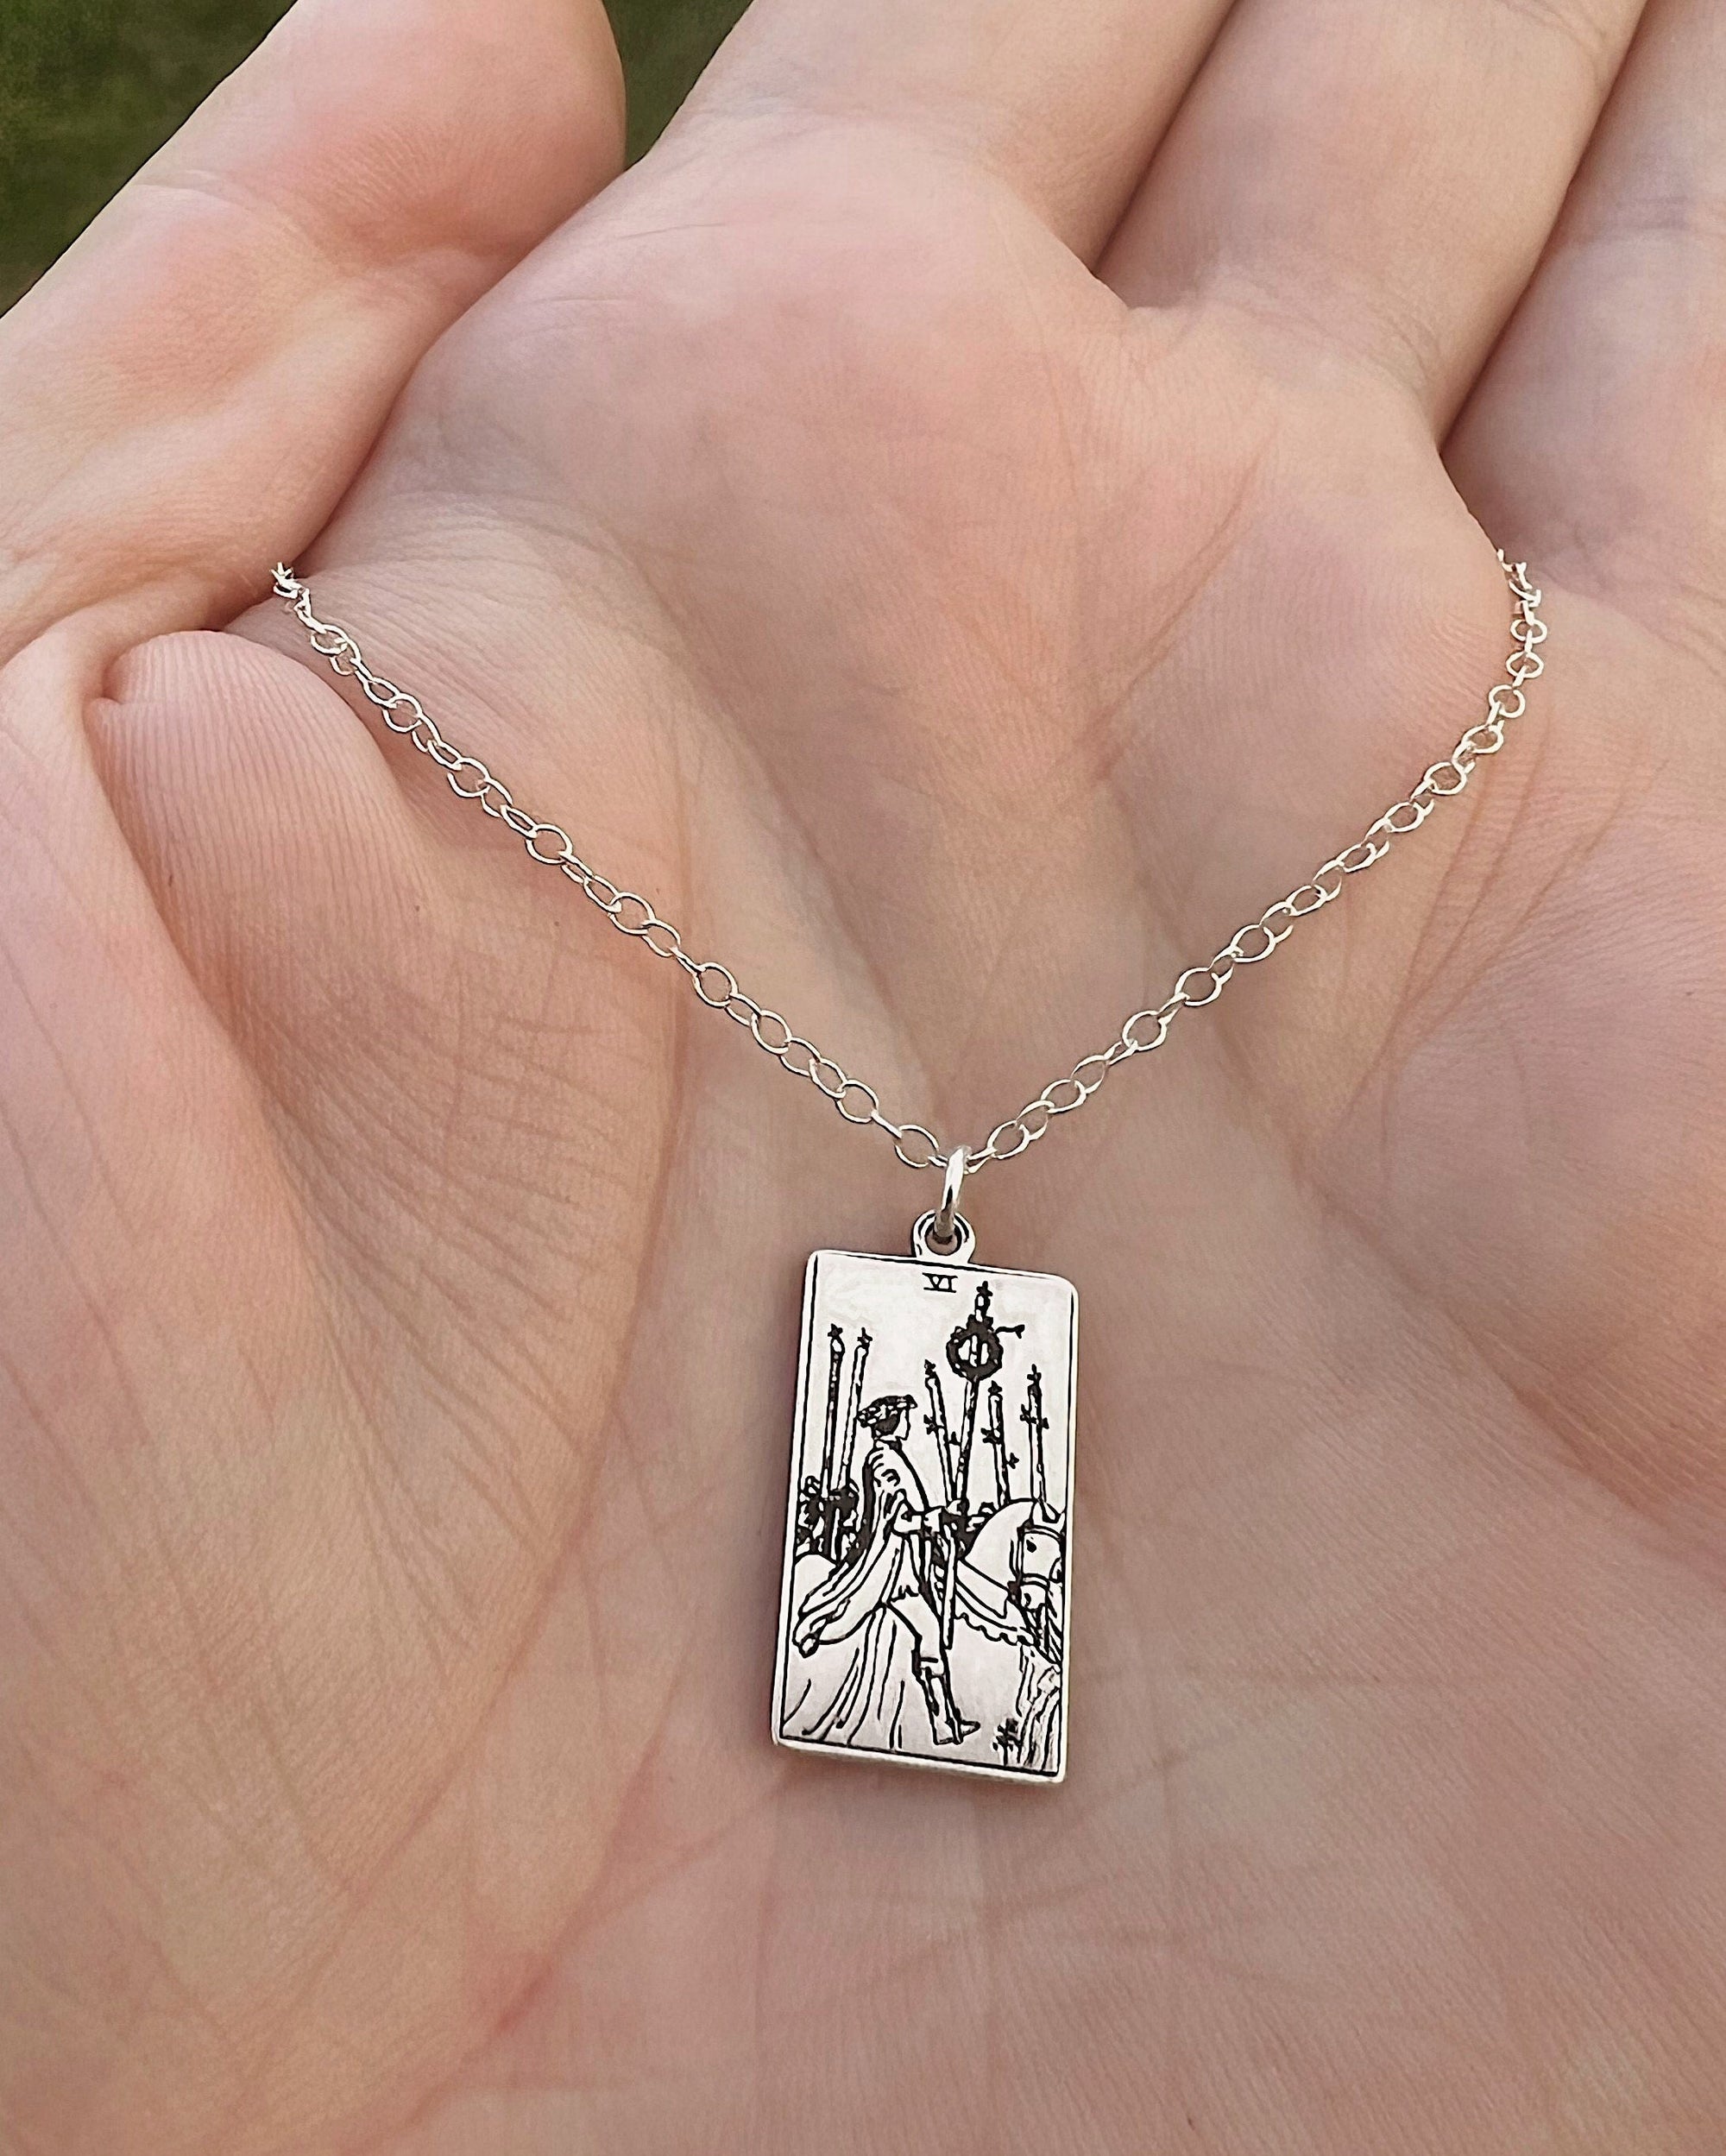 Six of Wands Tarot Card Necklace - Sterling Silver